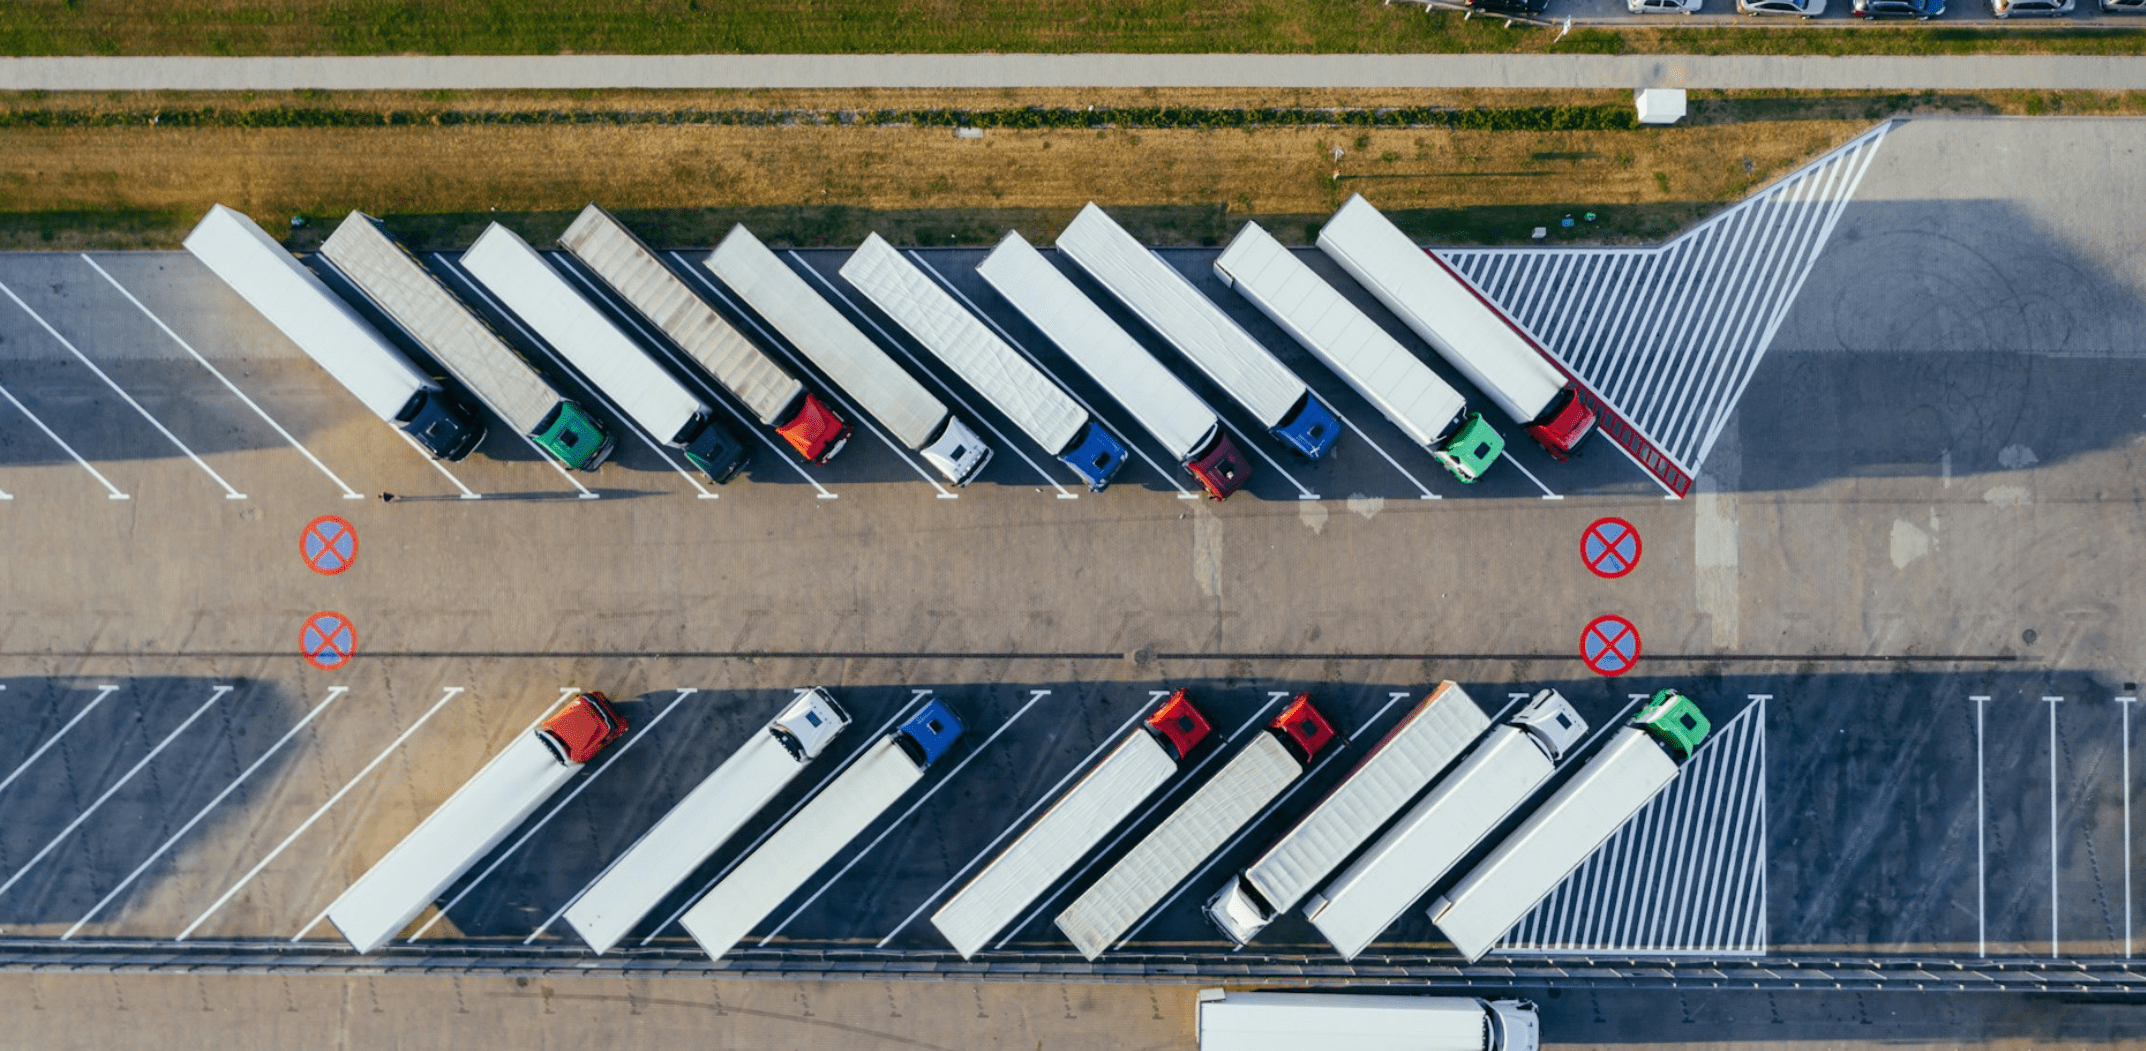 Aerial view of several trucks with trailers diagonally parked in a lot. The lot has designated parking spaces with some marked with red Xs, indicating no parking. The paved area includes green manicured grass and a row of parked cars at the top edge, showcasing a customized solution for efficient space management. CodersLink 2024.